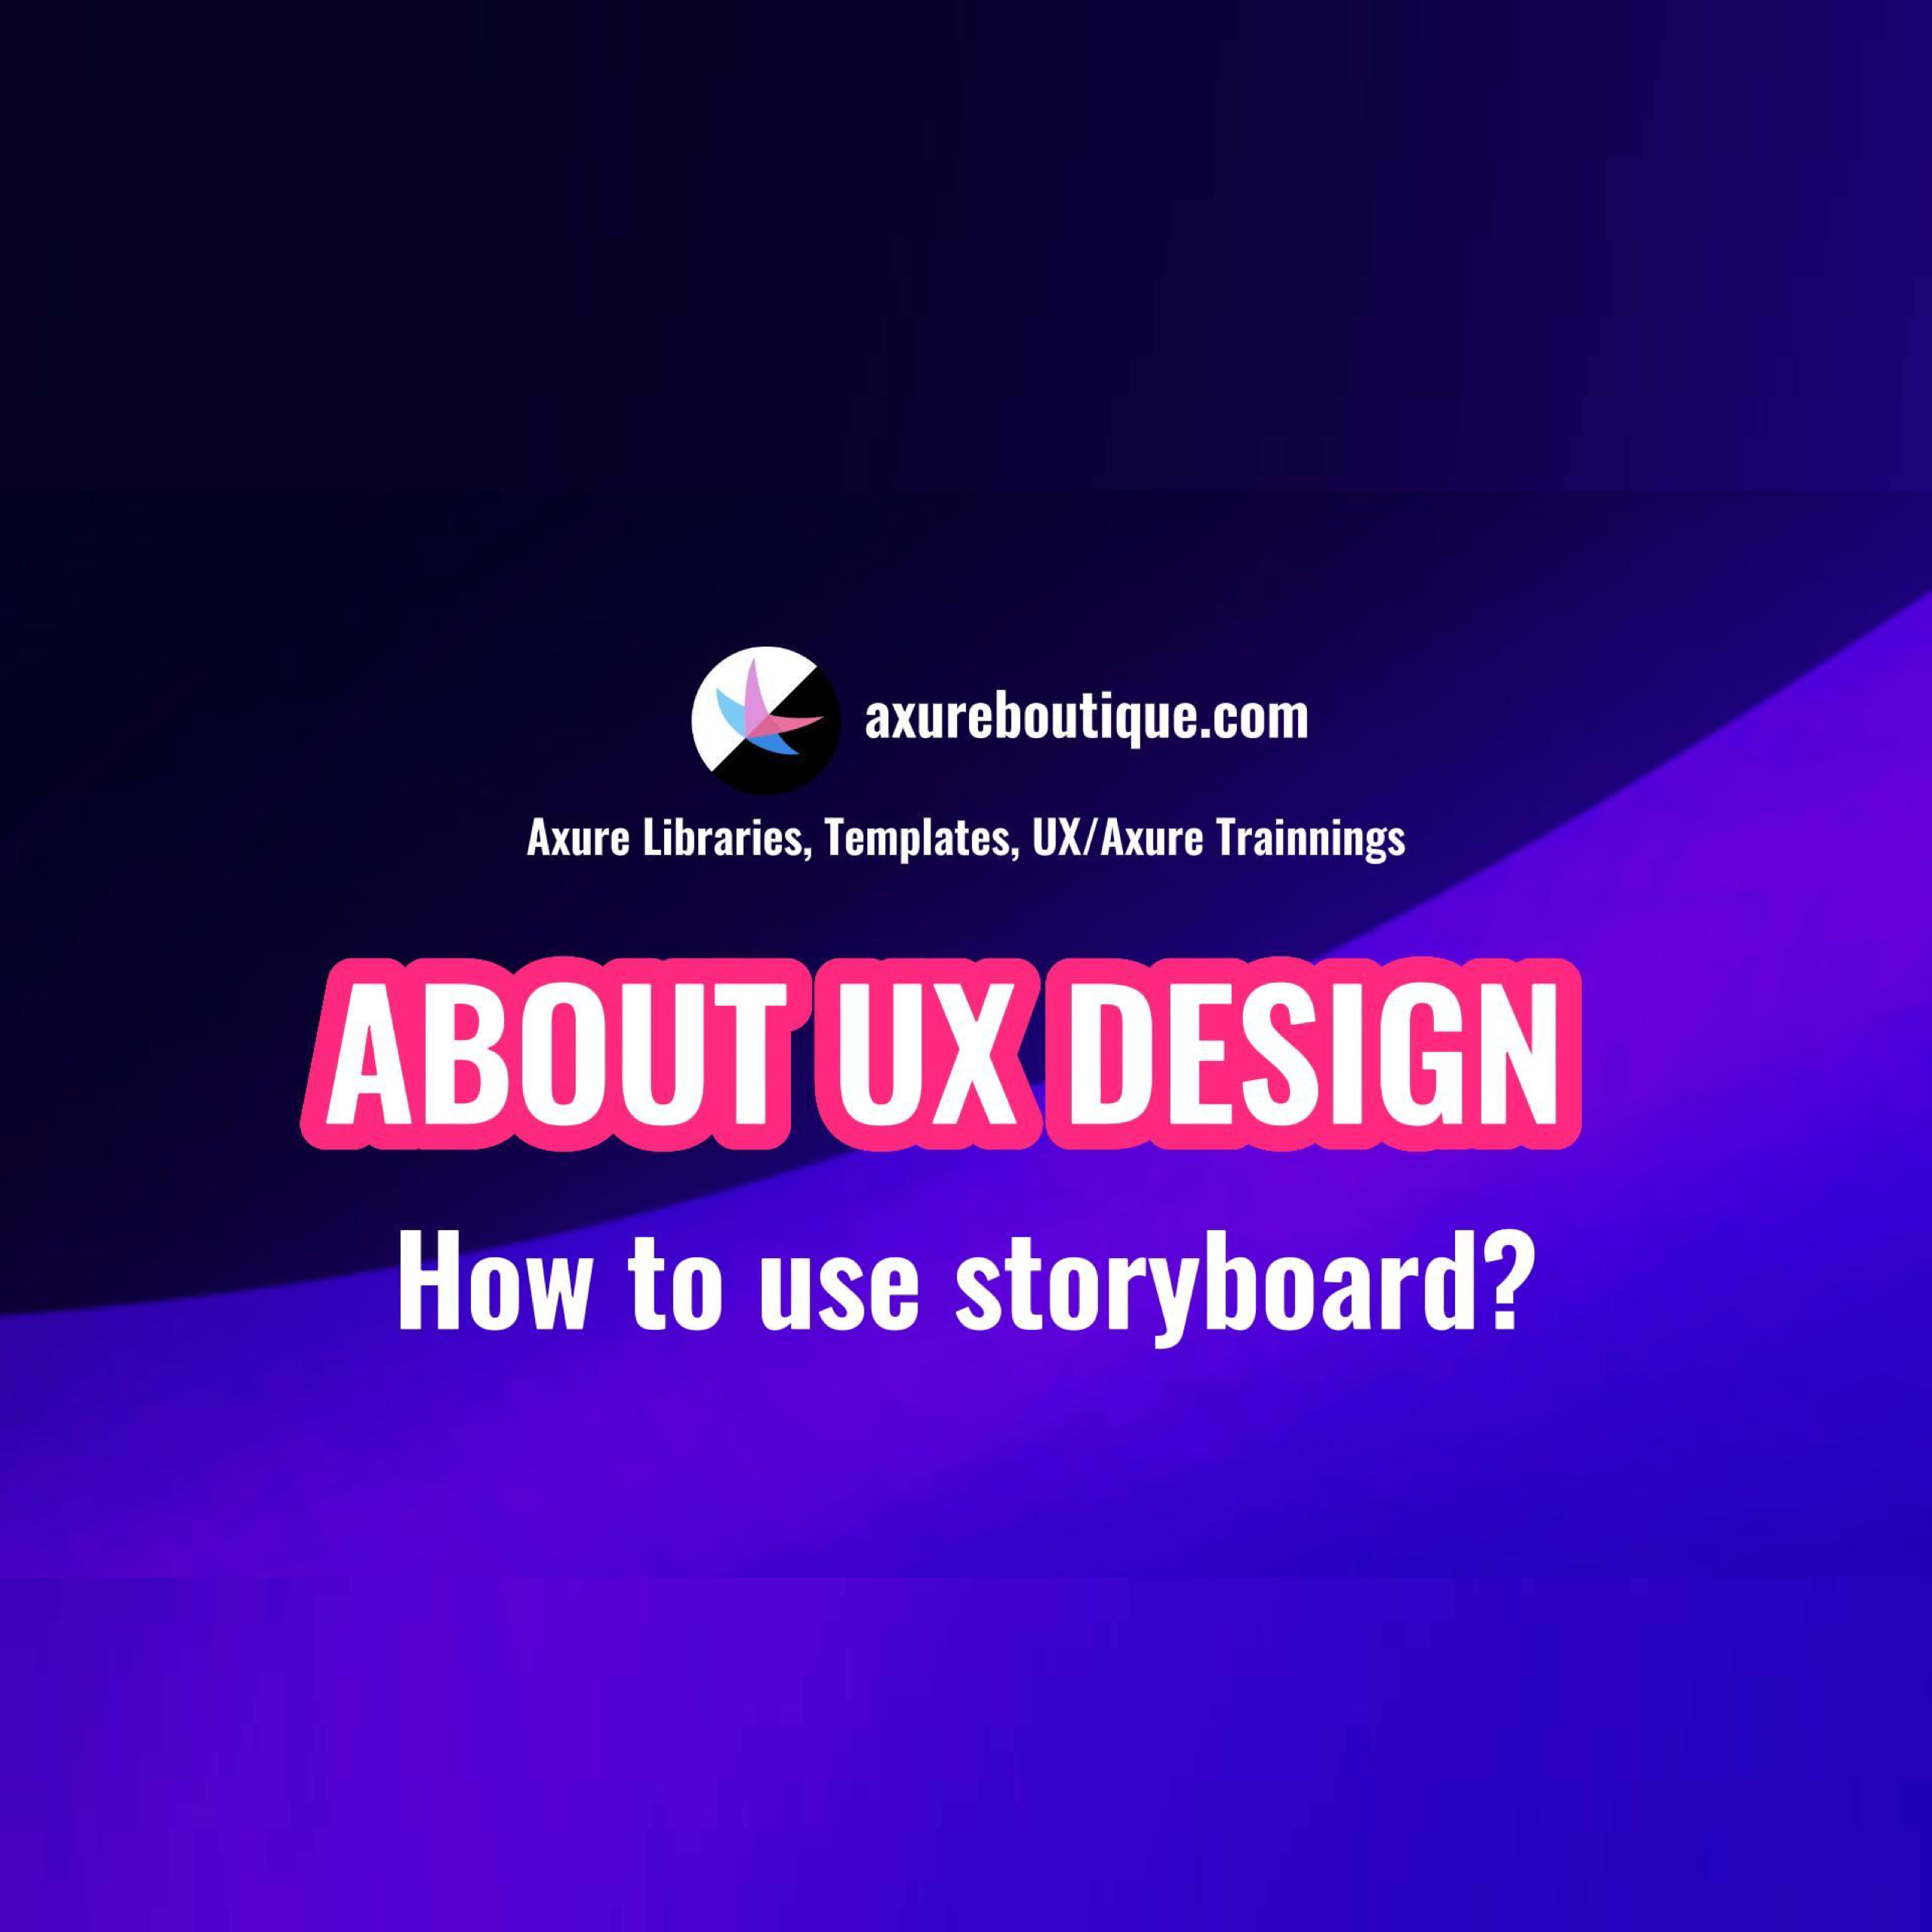 About UX Design: How to use storyboard? – AxureBoutique